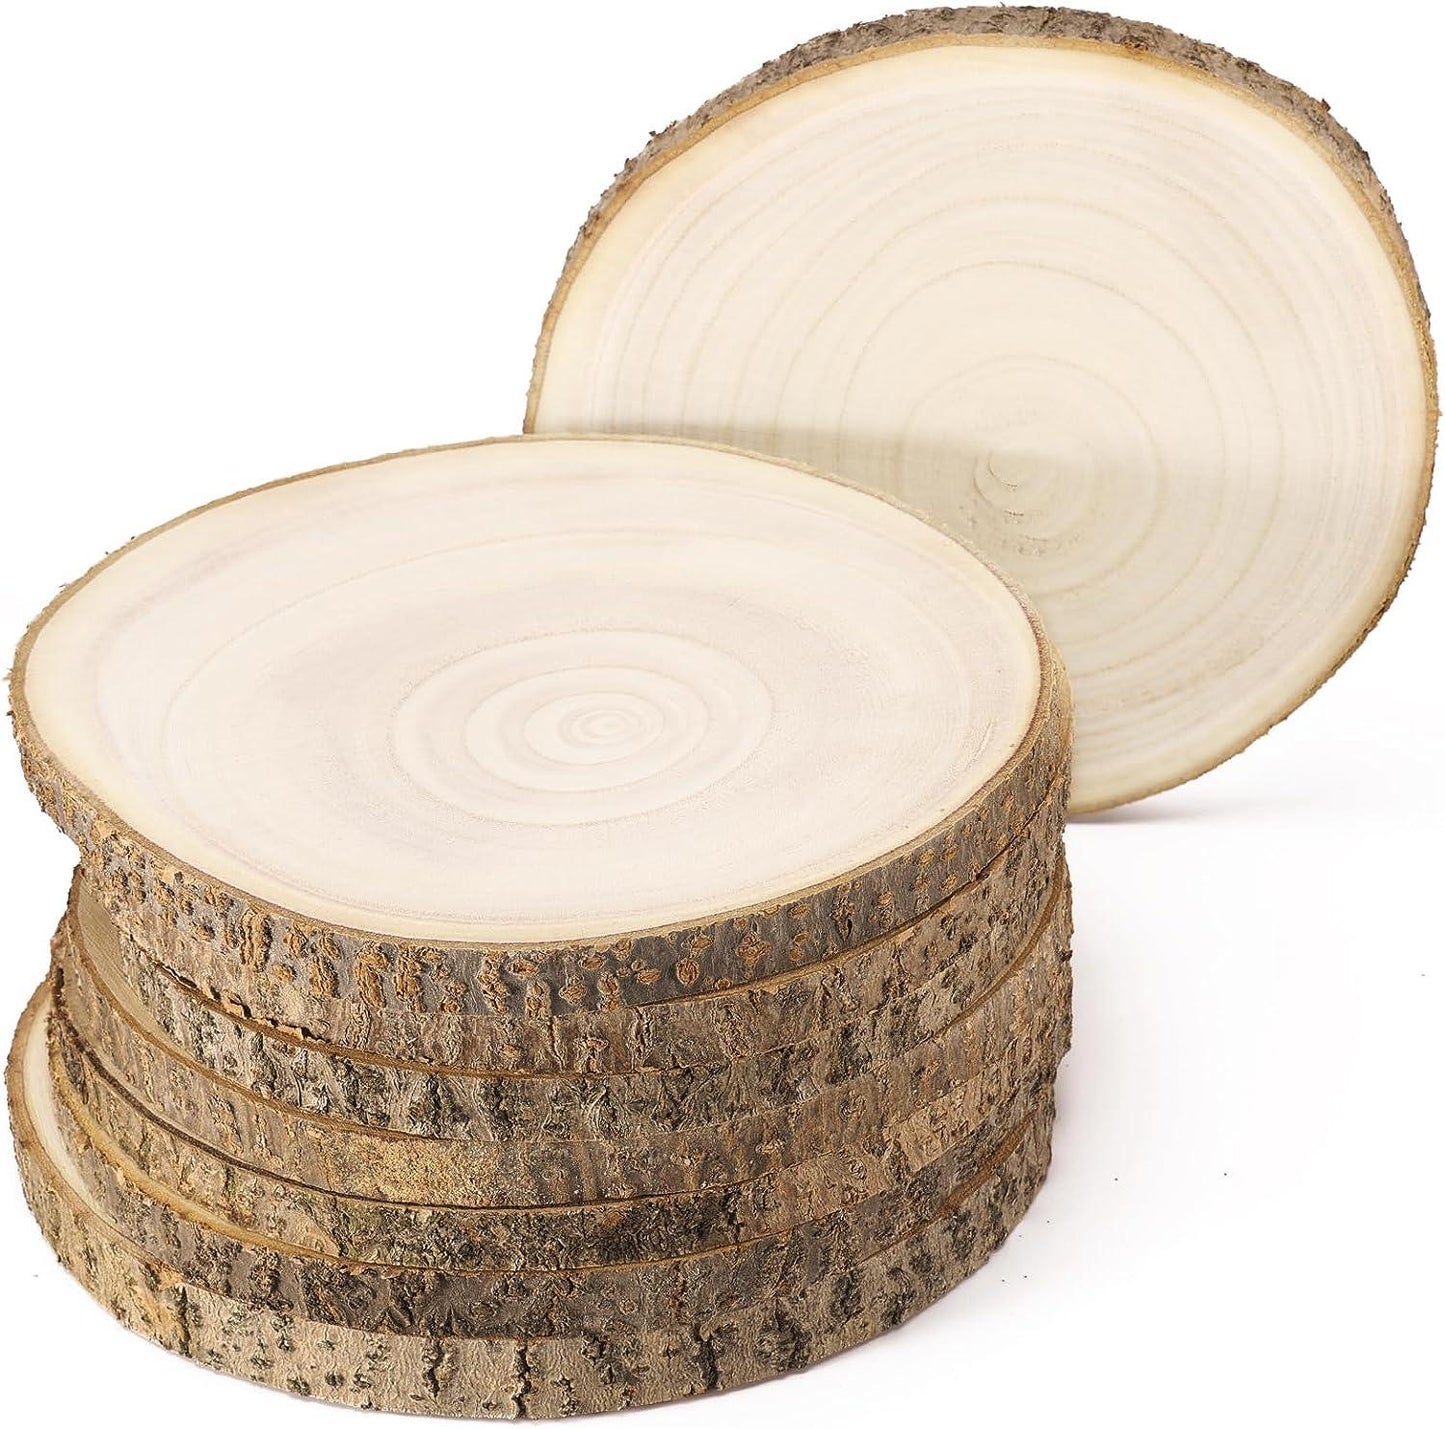 10pcs 6-7 Inch Nature Wood Slice for Weddings, Wood Slice Centerpieces, Rustic Wedding Decorations - If you say i do